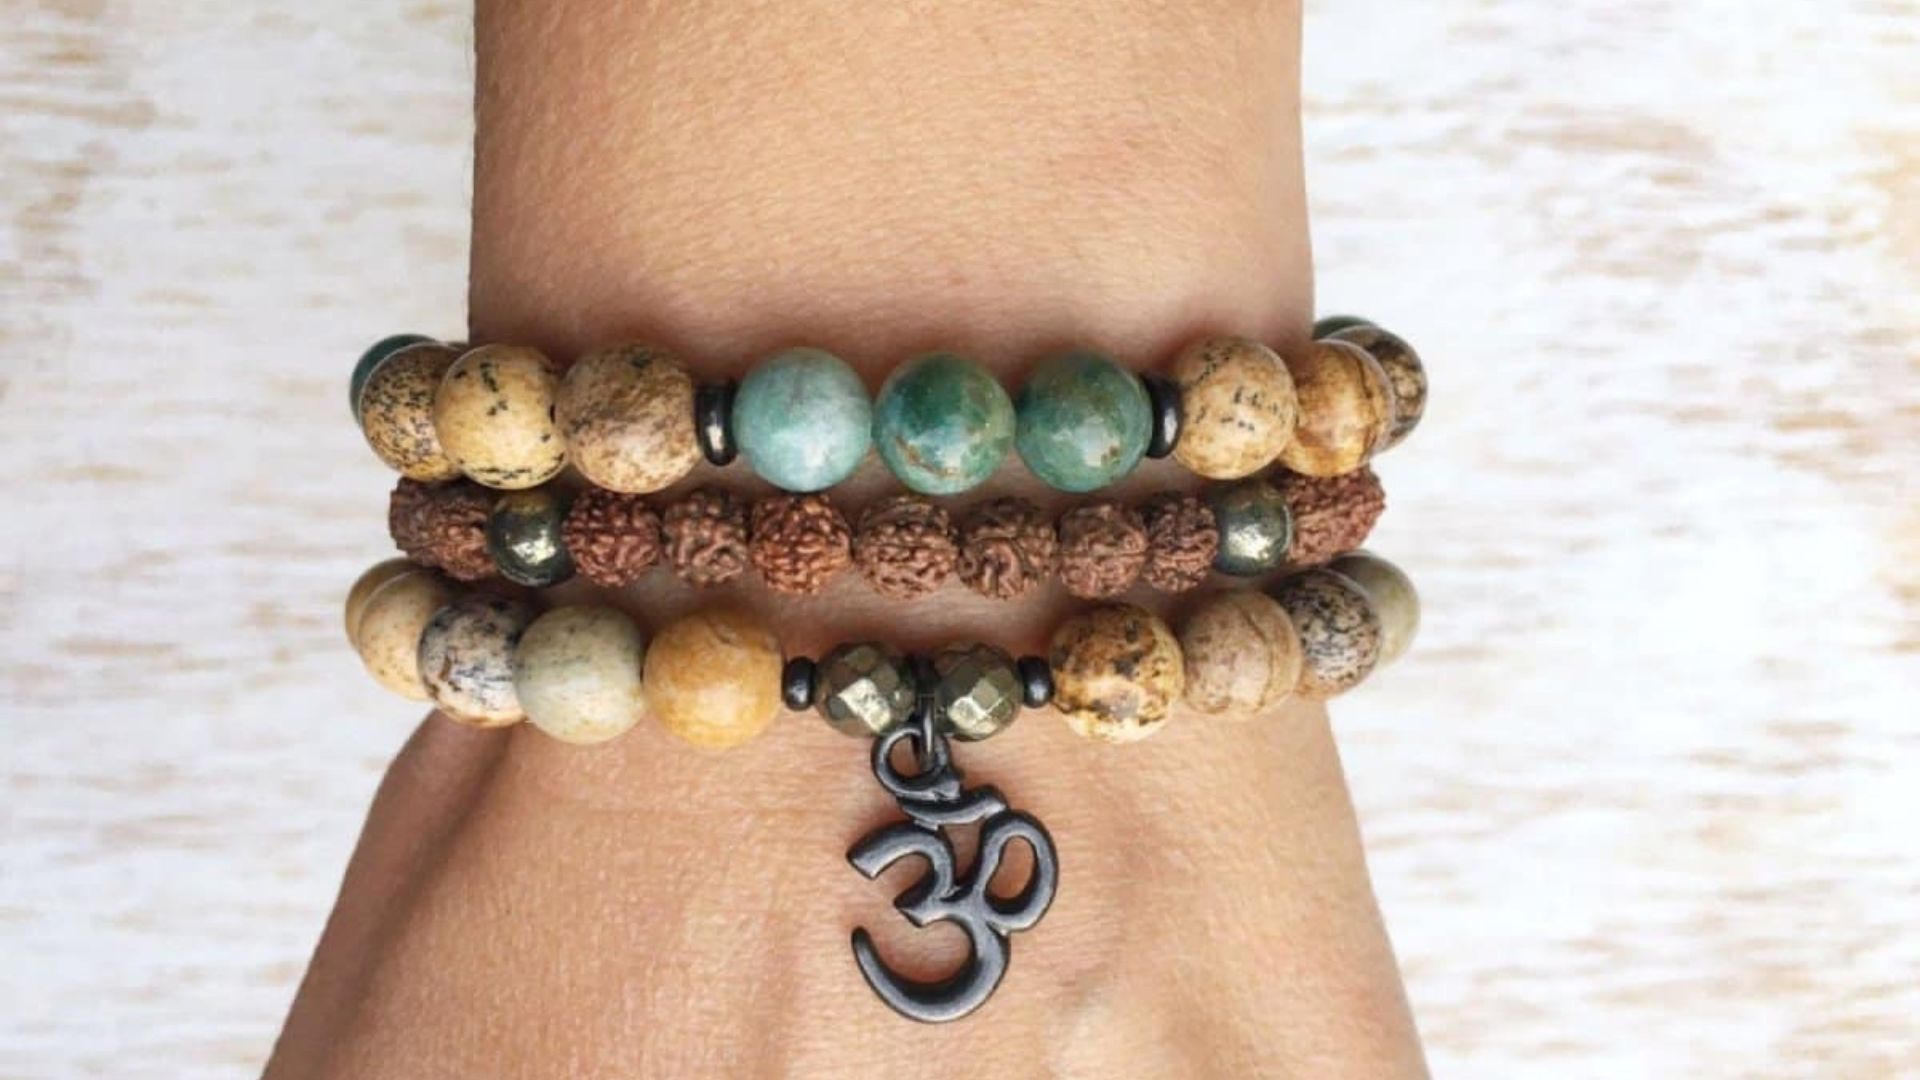 Yoga Bracelets - Harnessing The Power Of Healing Crystals And Mindfulness